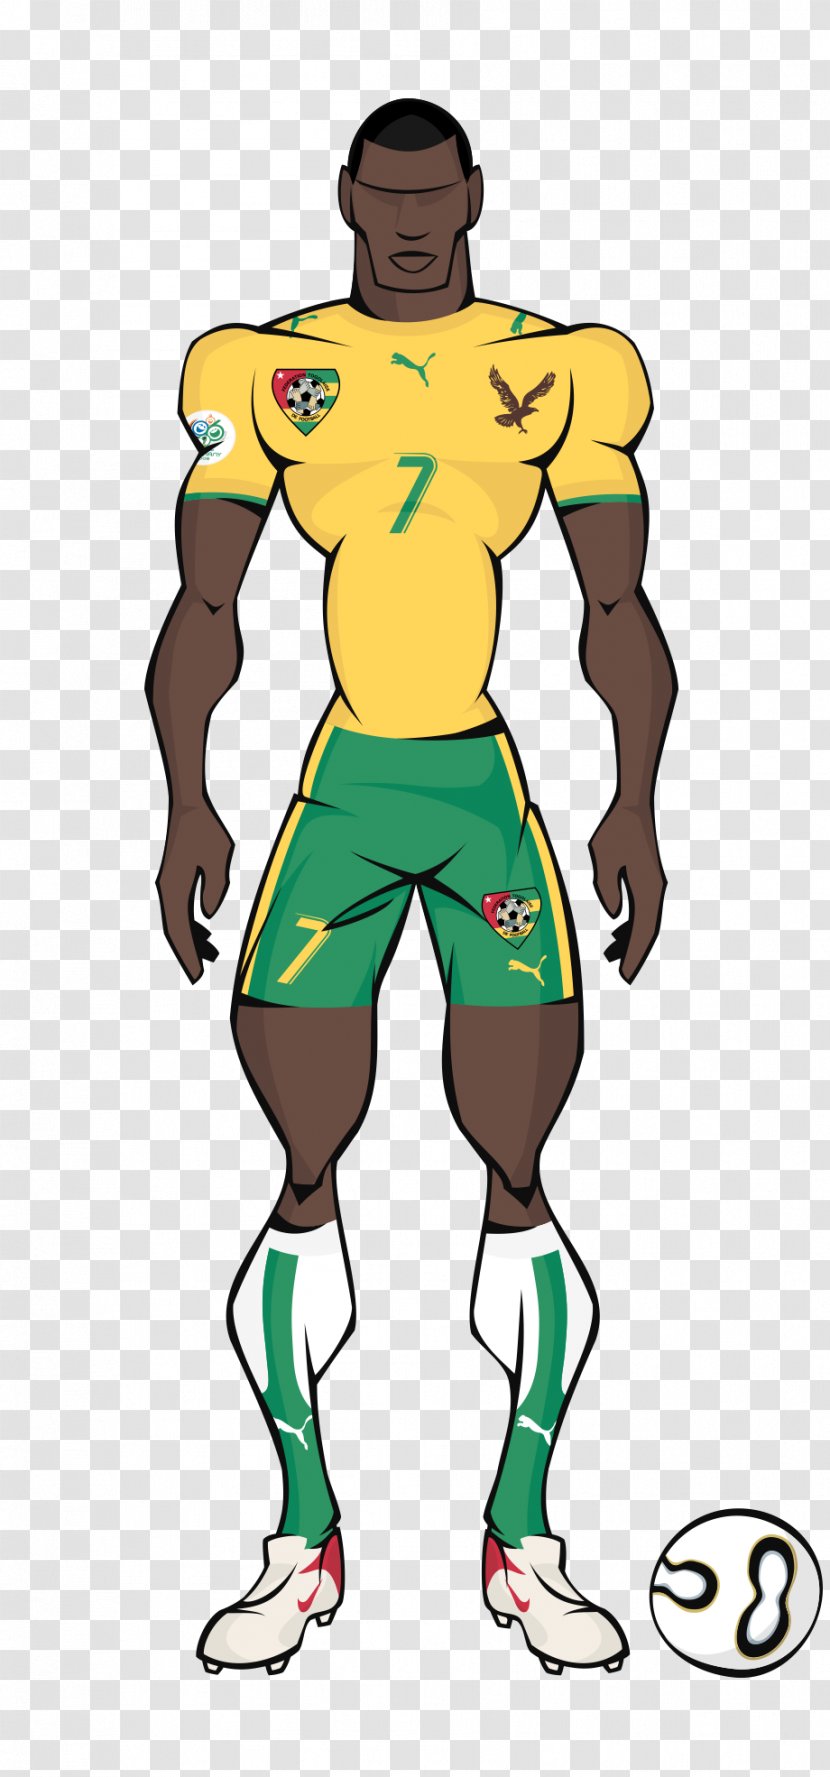 South Africa 2010 FIFA World Cup Cameroon National Football Team Jacques Songo'o Claude Le Roy - Heart - Oliver Kahn Transparent PNG